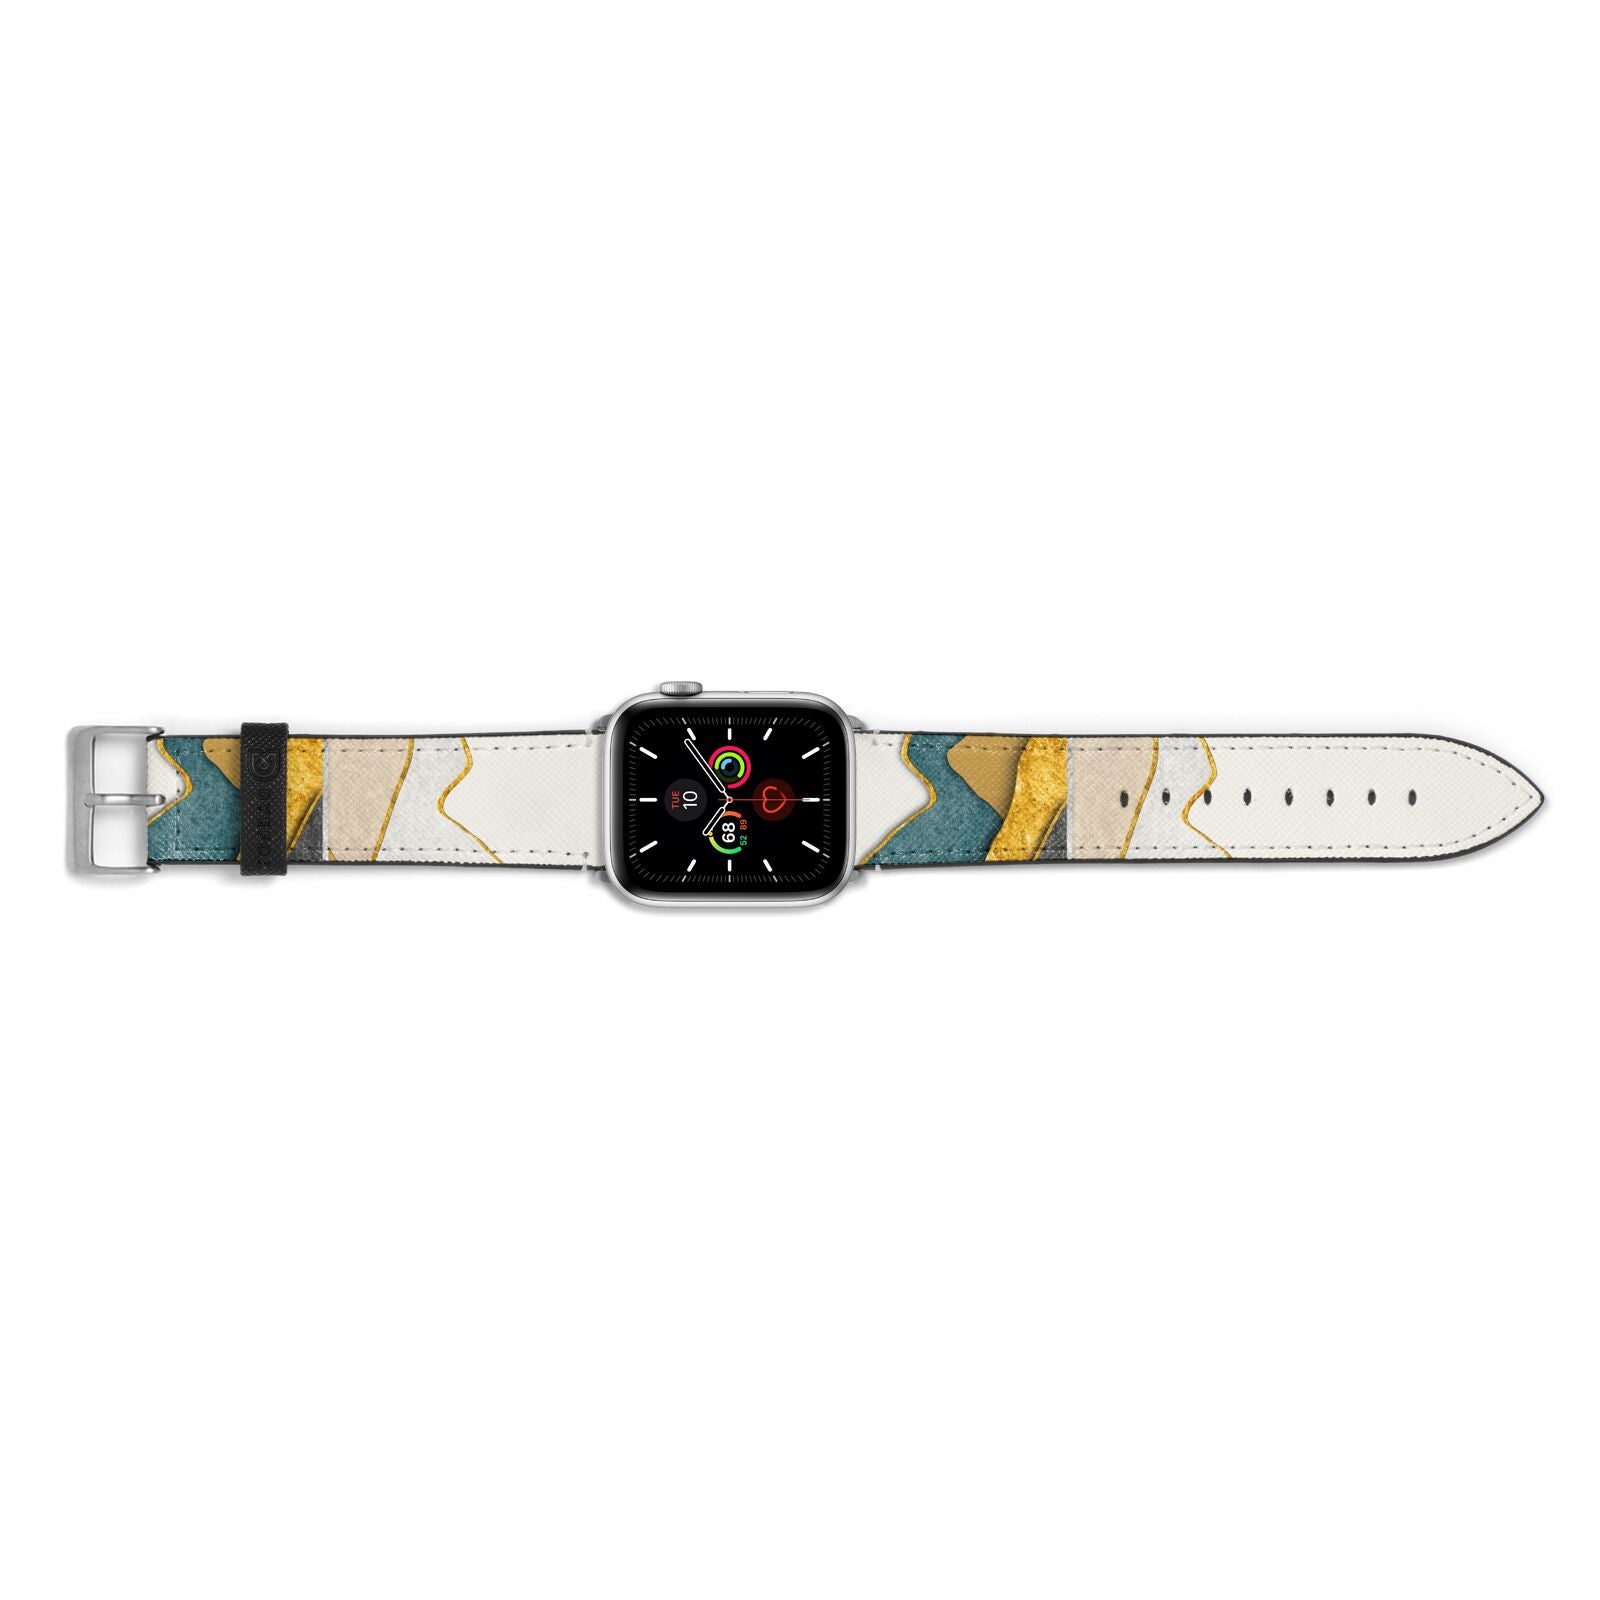 Abstract Mountain Apple Watch Strap Landscape Image Silver Hardware